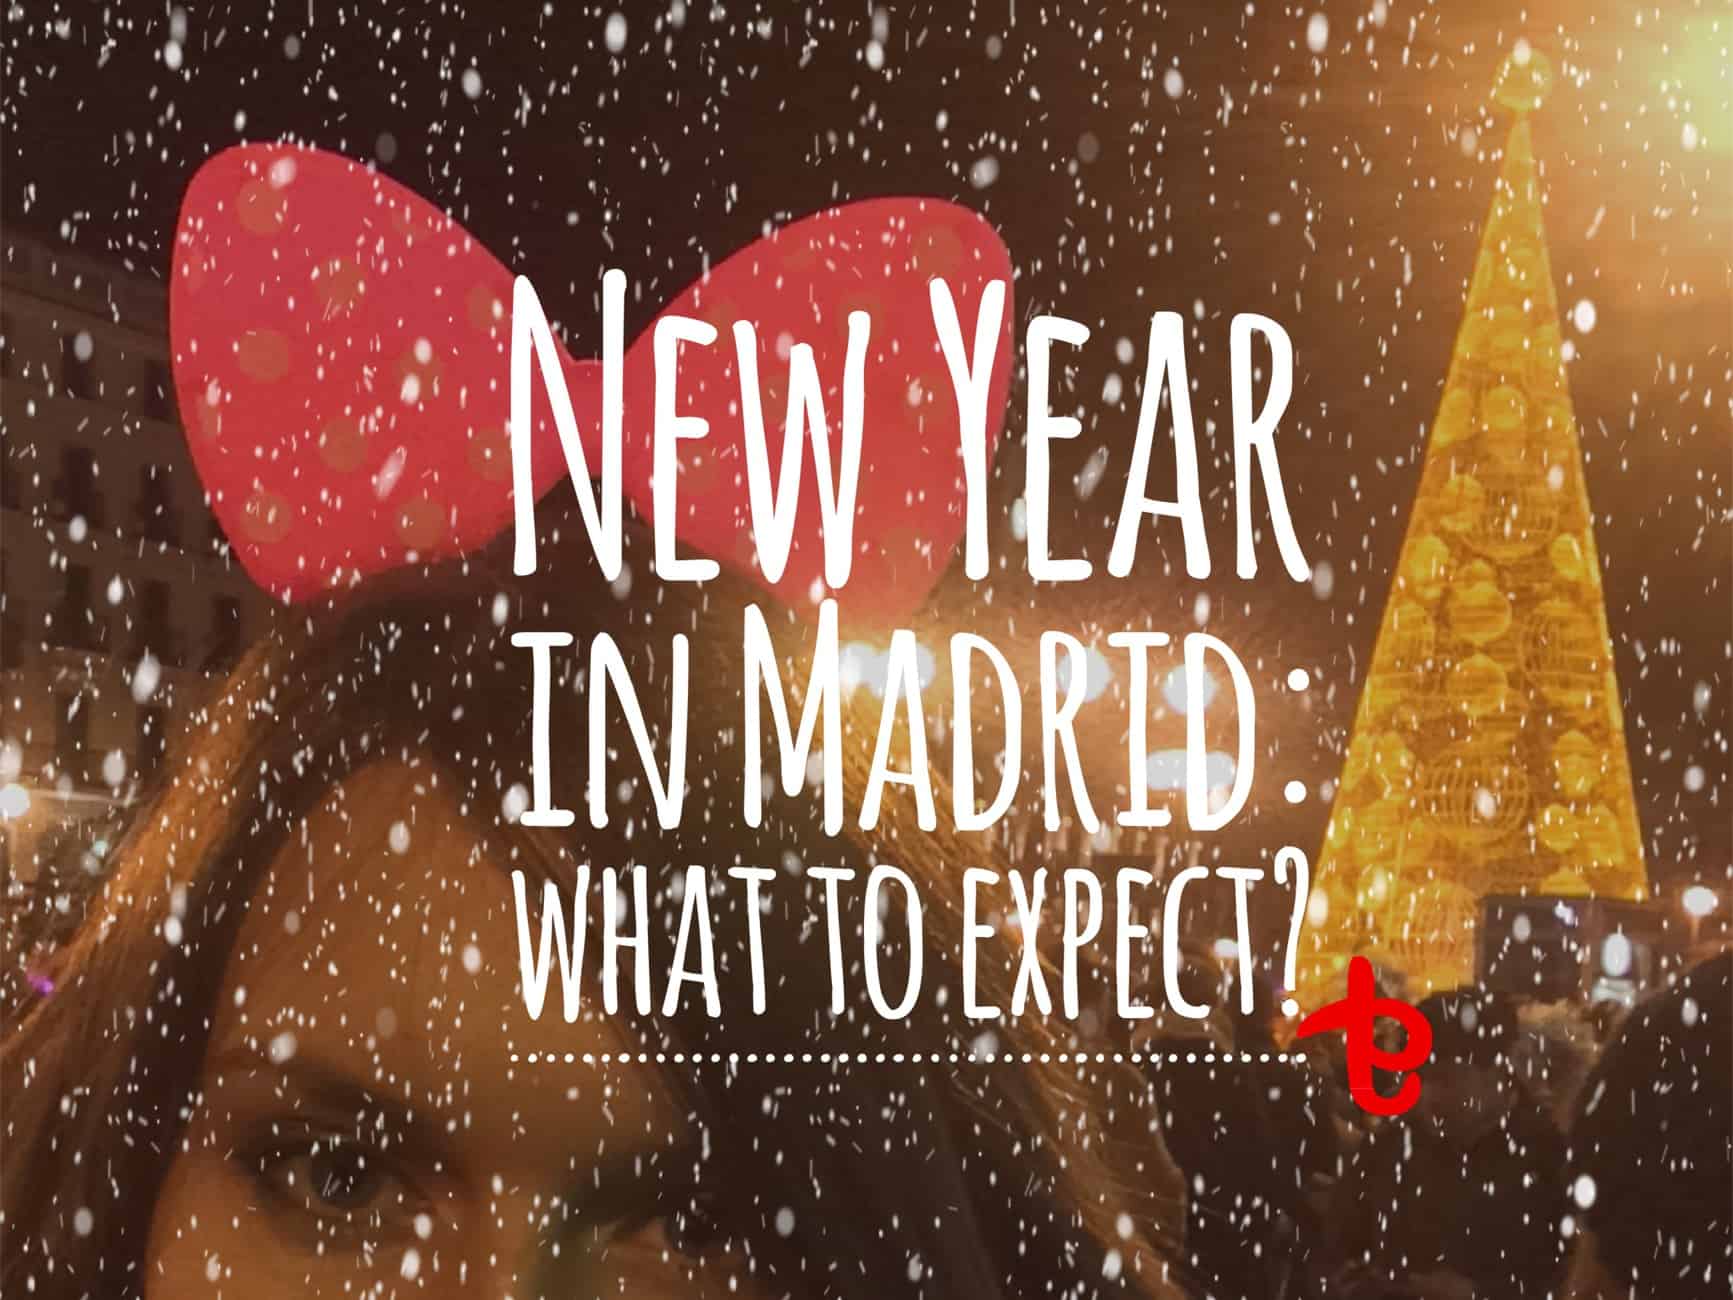 Celebrating the New Year in Madrid: what to expect